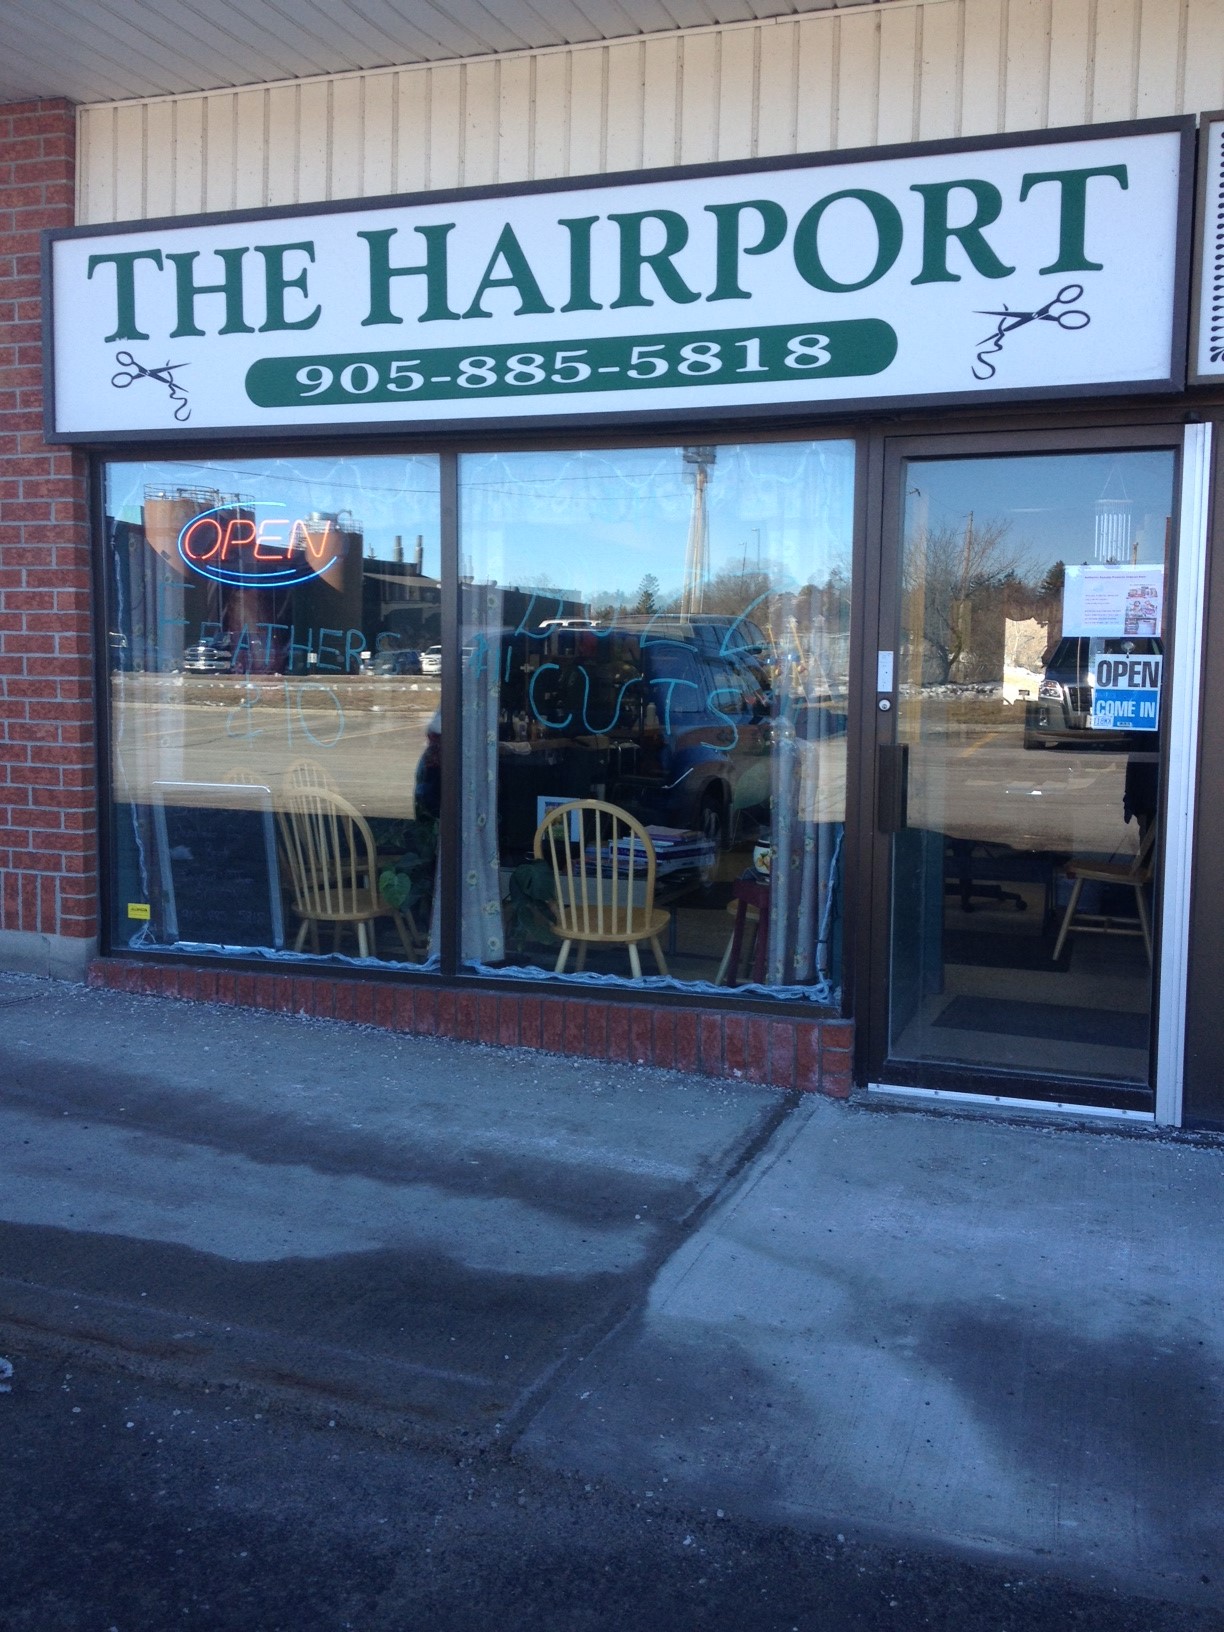 The Hairport